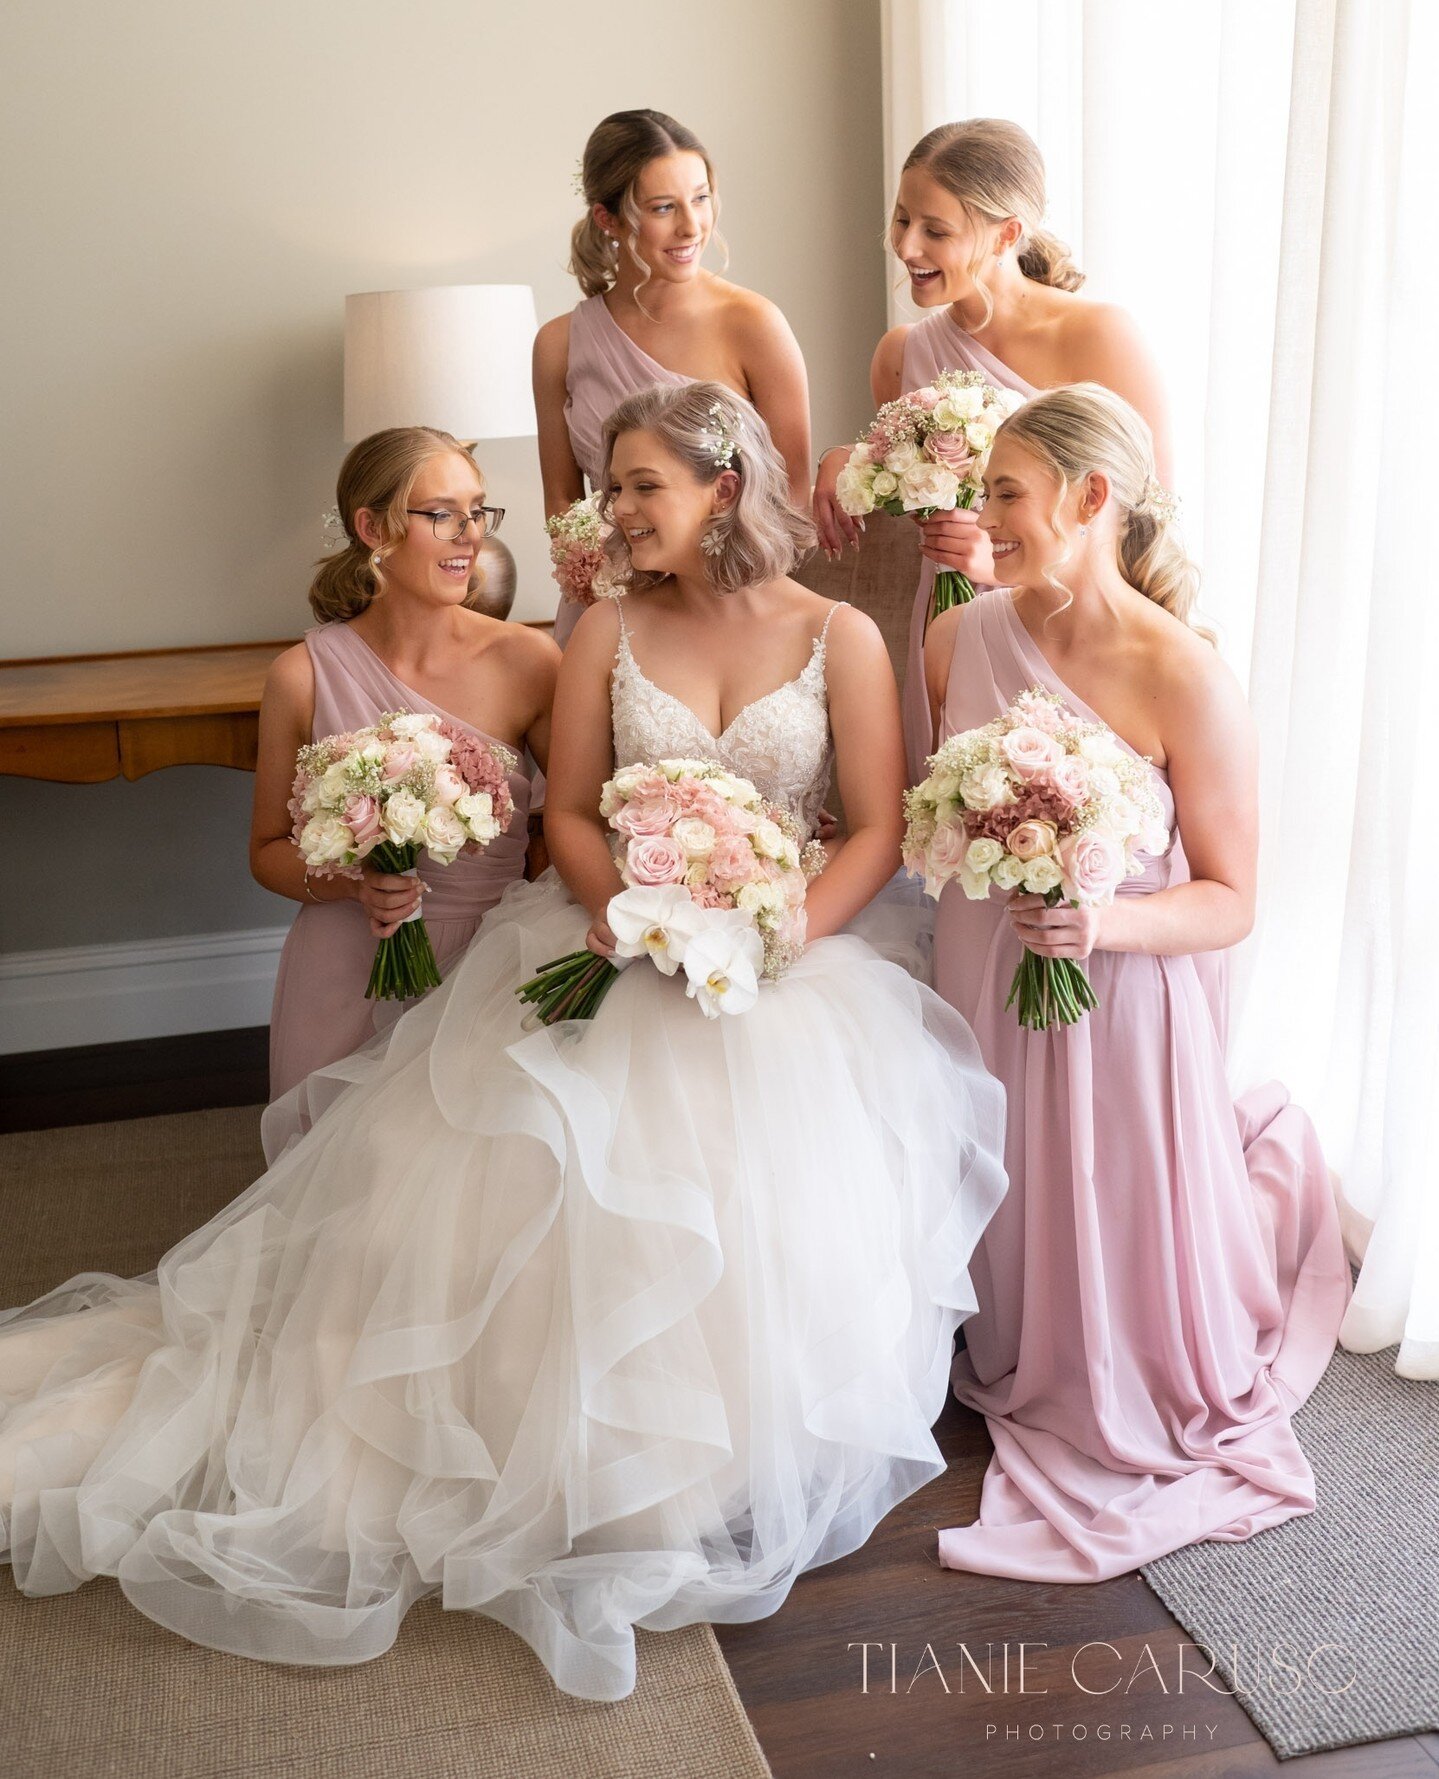 Tegan and her beautiful bridesmaids looking gorgeous at @anlaby_station⁠
⁠
Wedding Dress: @bridalcollective_⁠
Hair: Sue from @sweetblend.hair.body.skin⁠
Makeup: @nataliejadebeauty⁠
Flowers: @bloom_amor